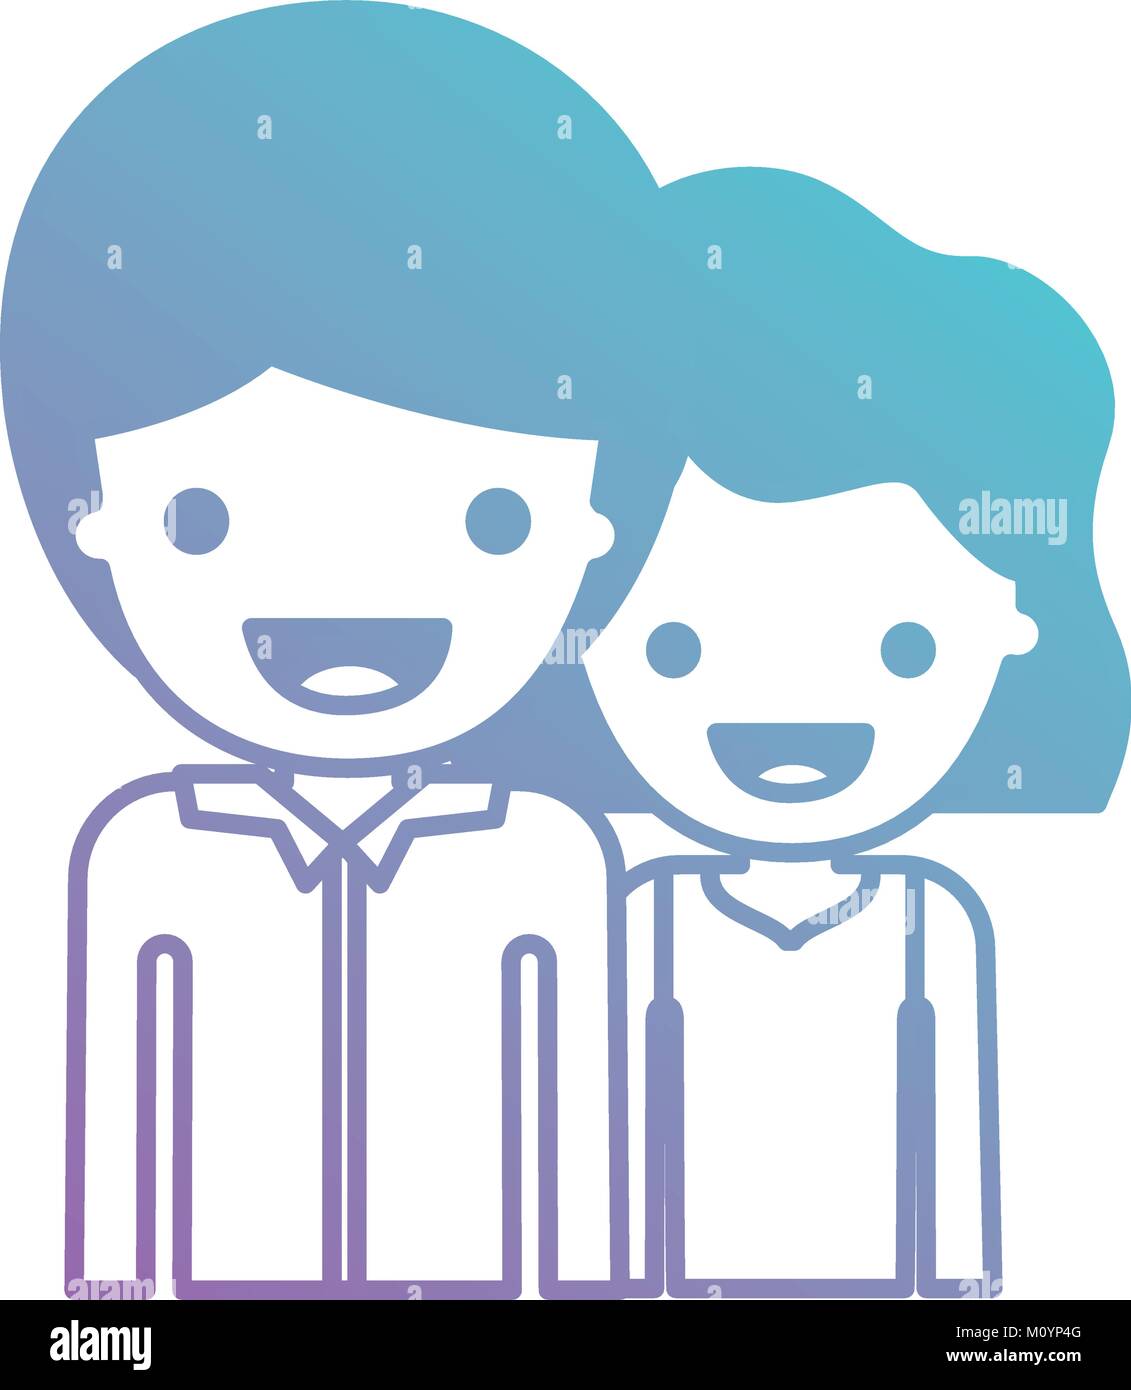 Half Body People With Boy In Shirt Long Sleeve And Short Hair And Girl In T Shirt Sleeveless And Short Wavy Hair In Degraded Blue To Purple Color Silhouette Stock Vector Image